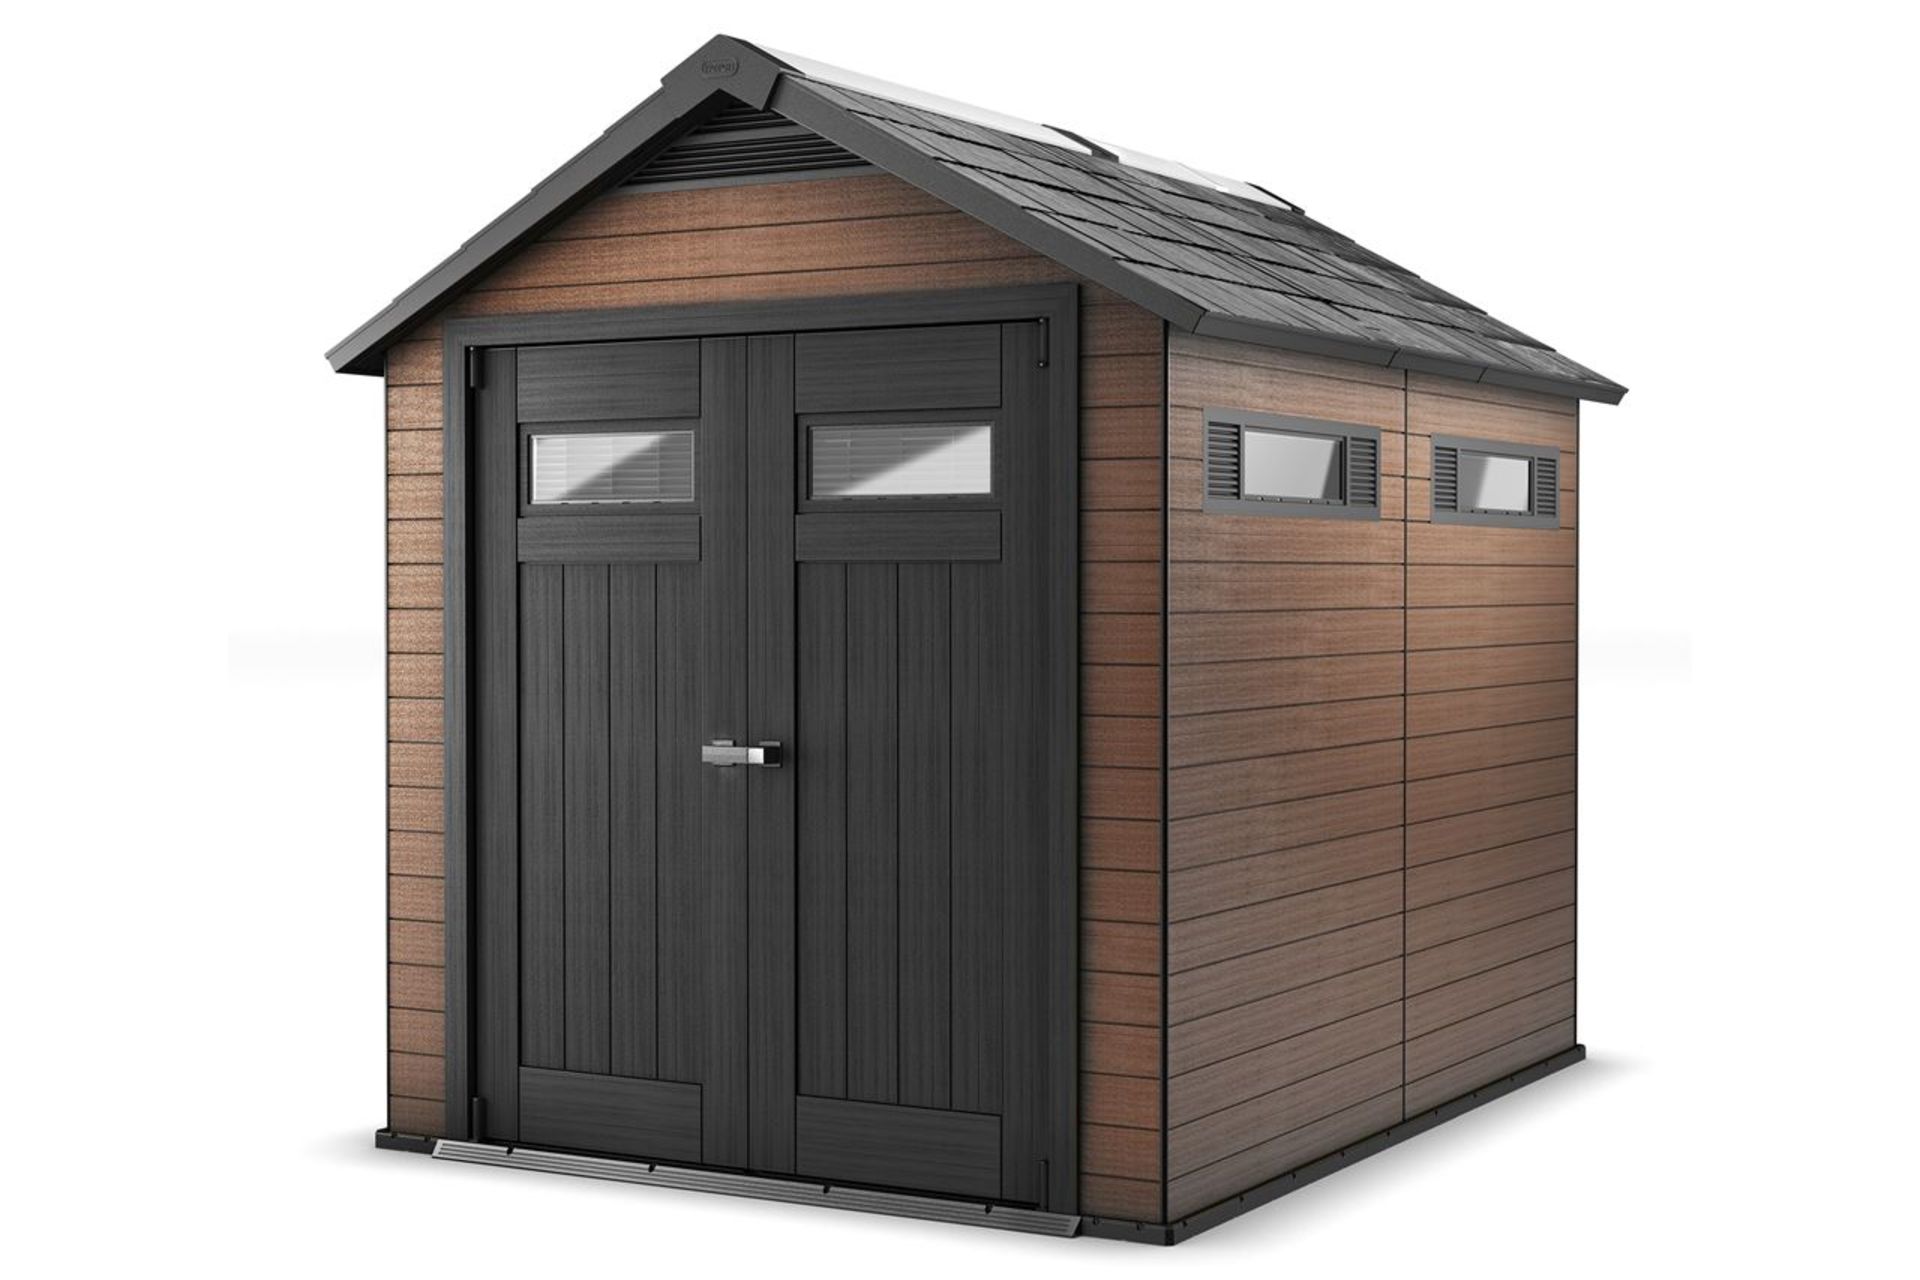 Keter Oakland 759 Outdoor Shed RRP £1100 - Image 4 of 5